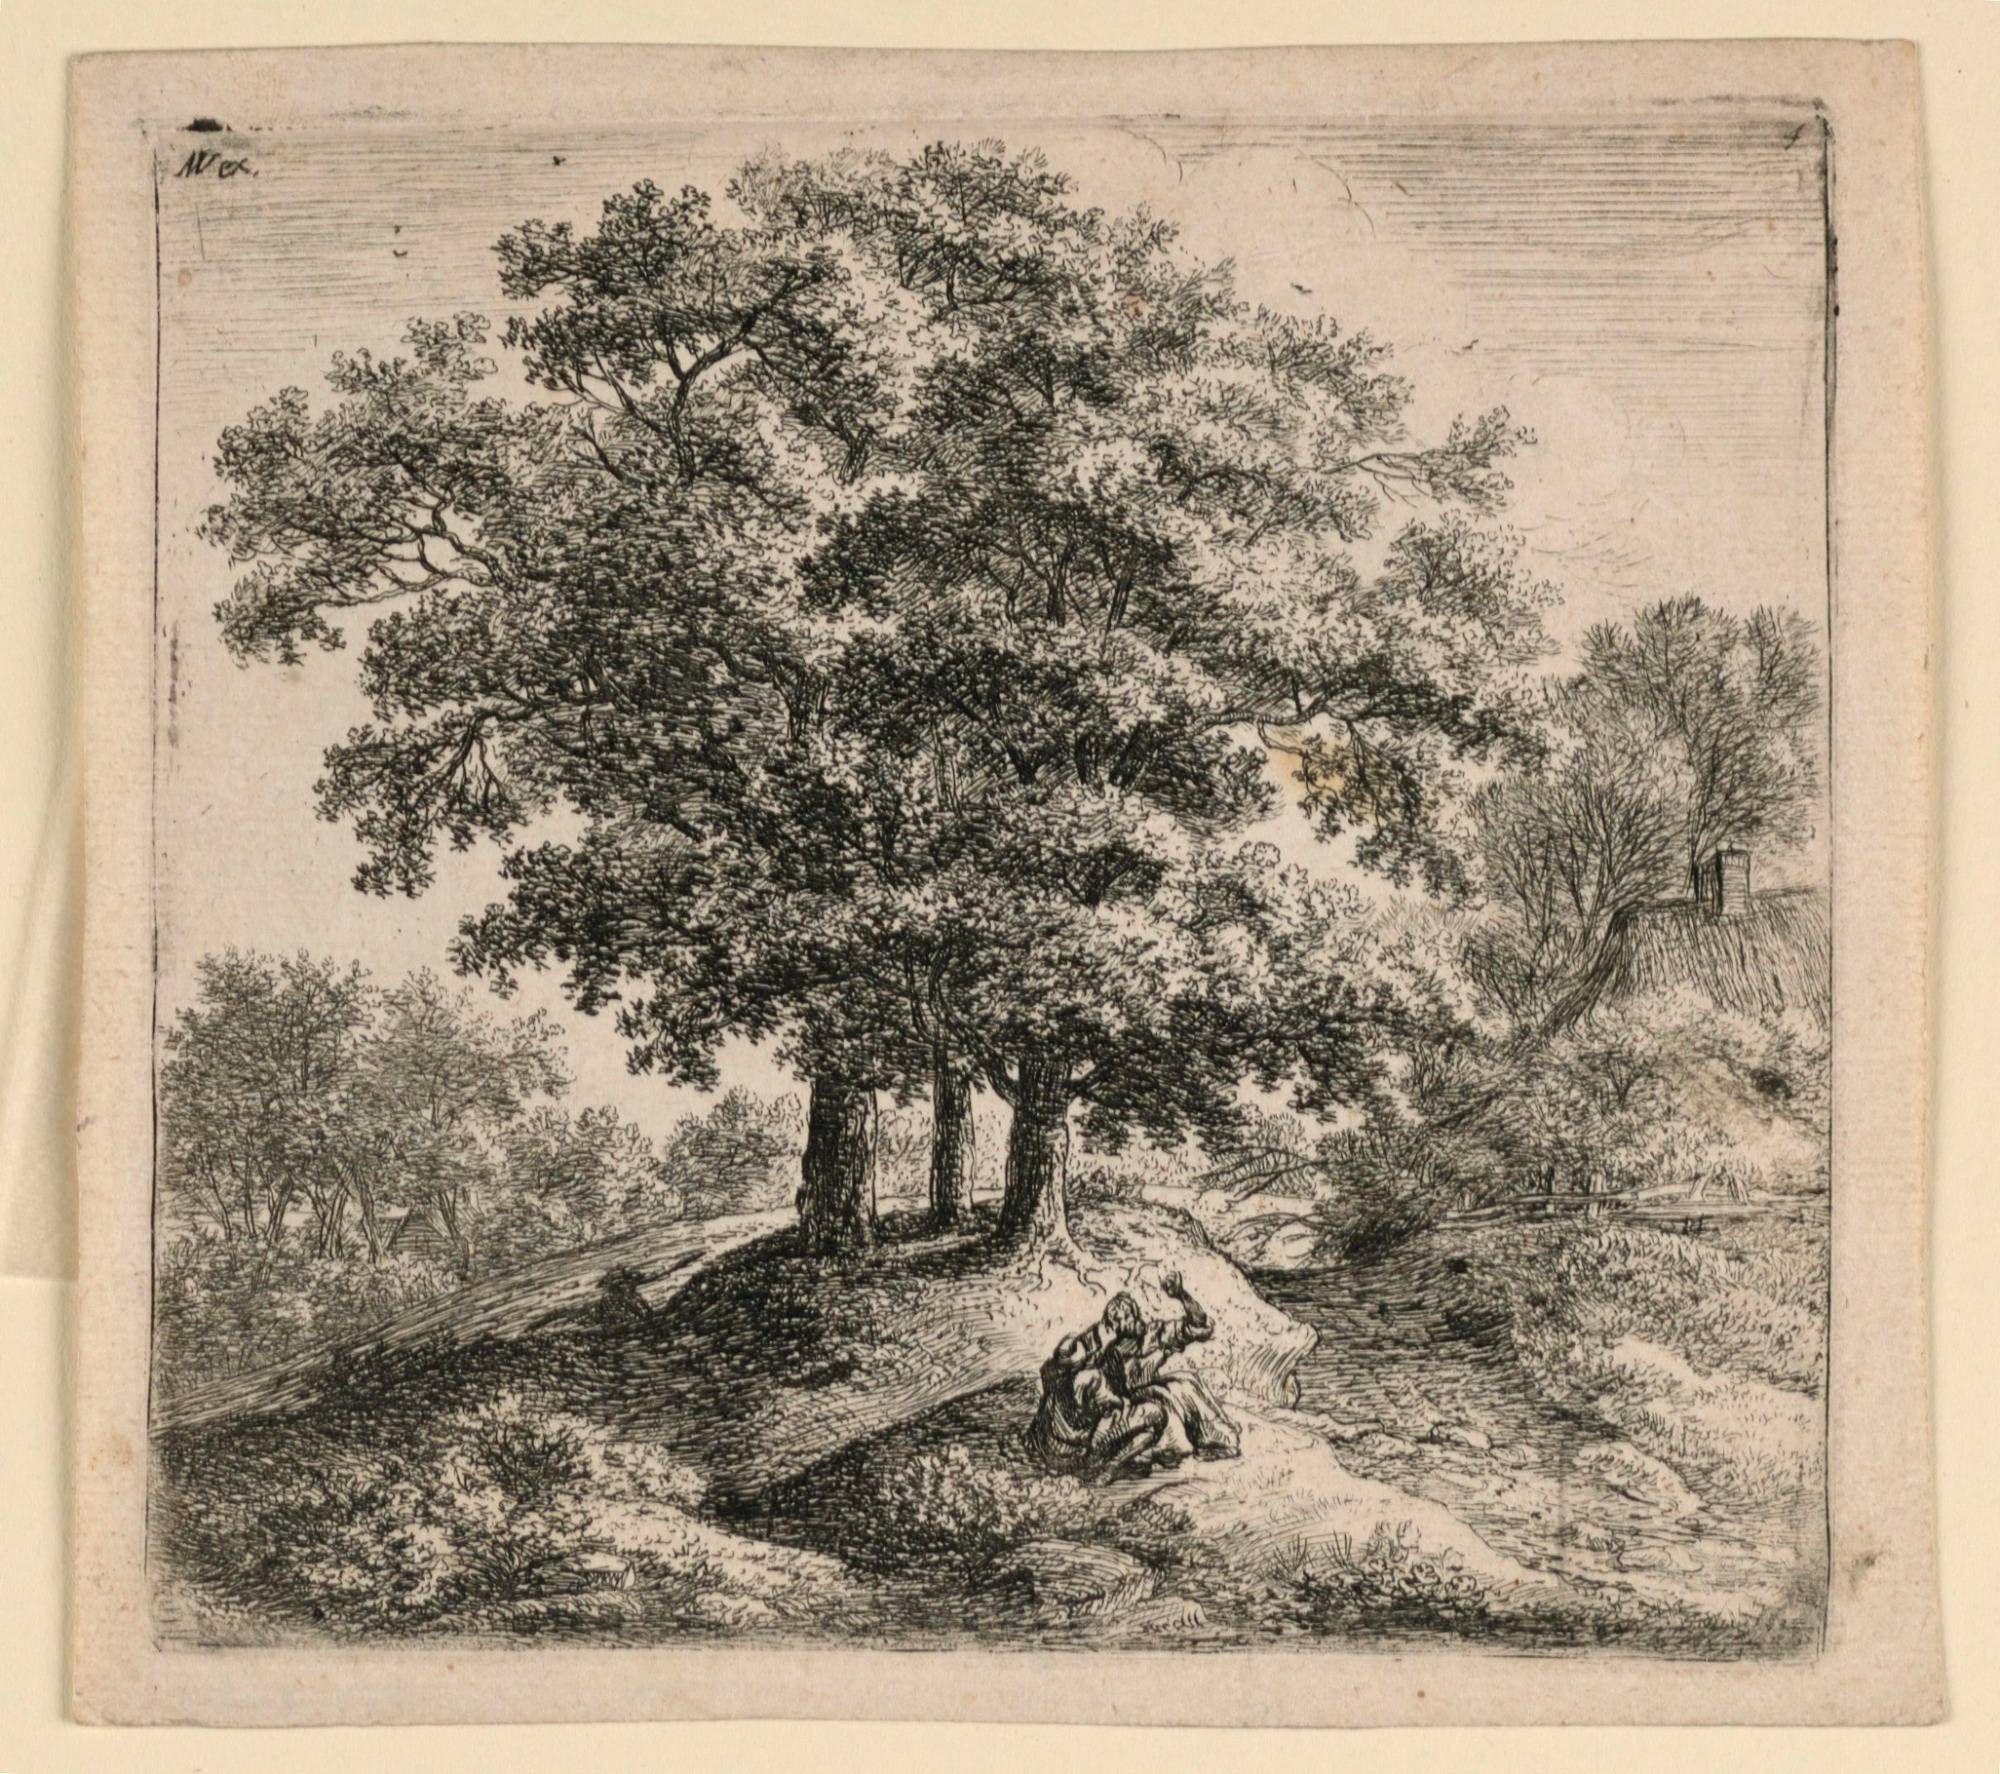 Two Rustics Seated on a Bank Near Three Trees